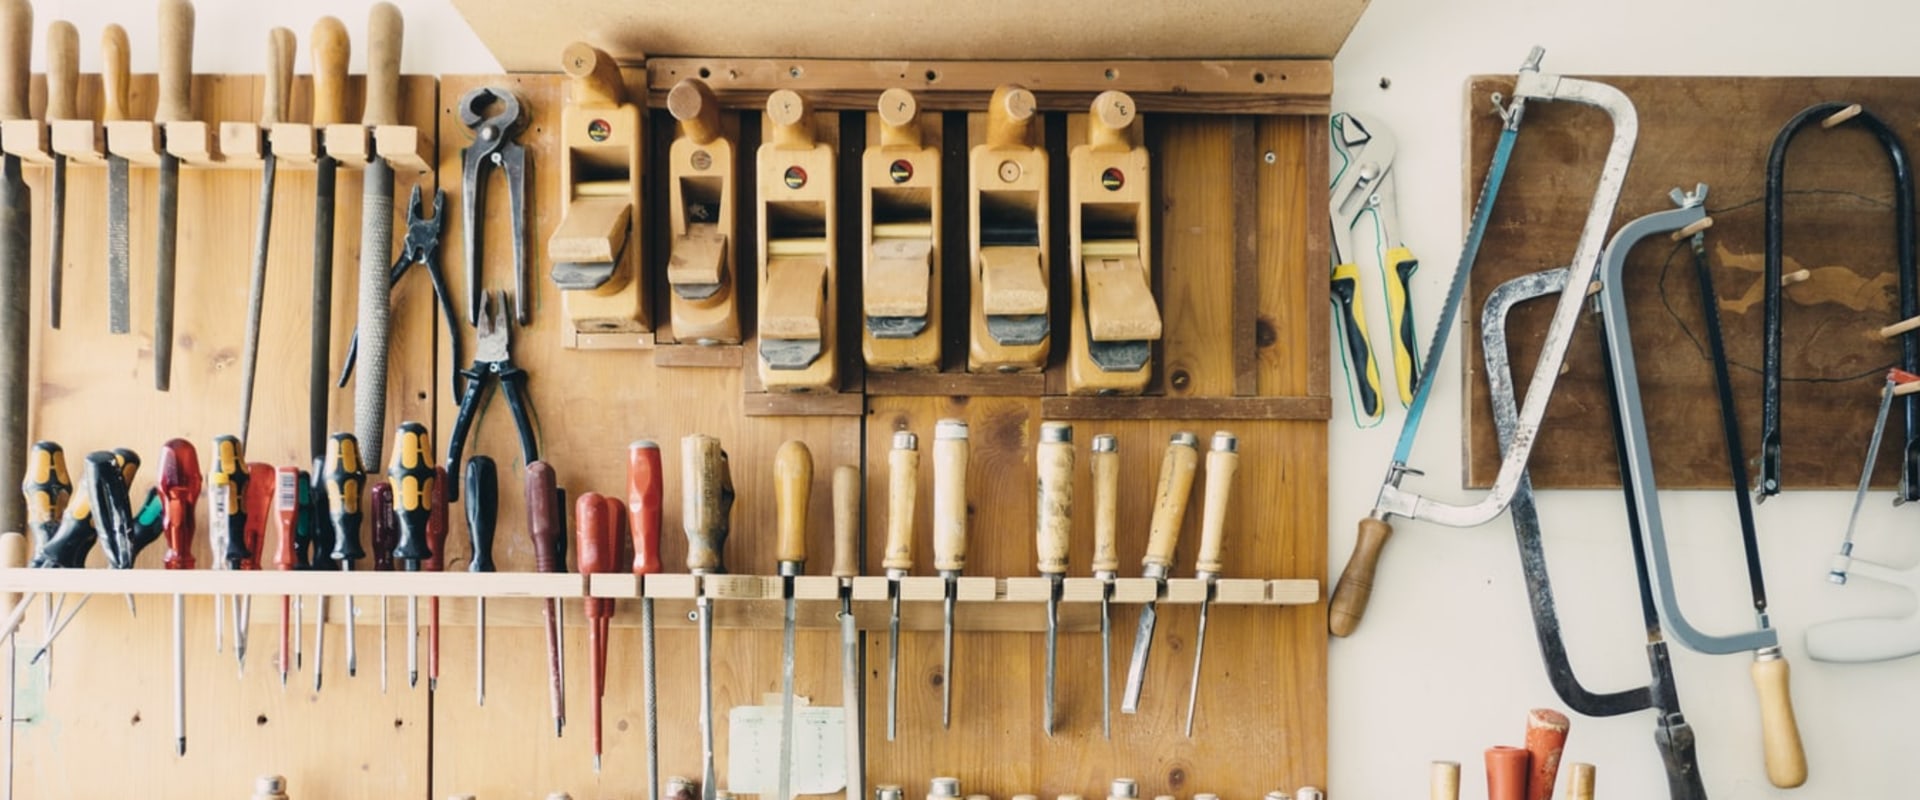 What are the 5 categories of hand tools?